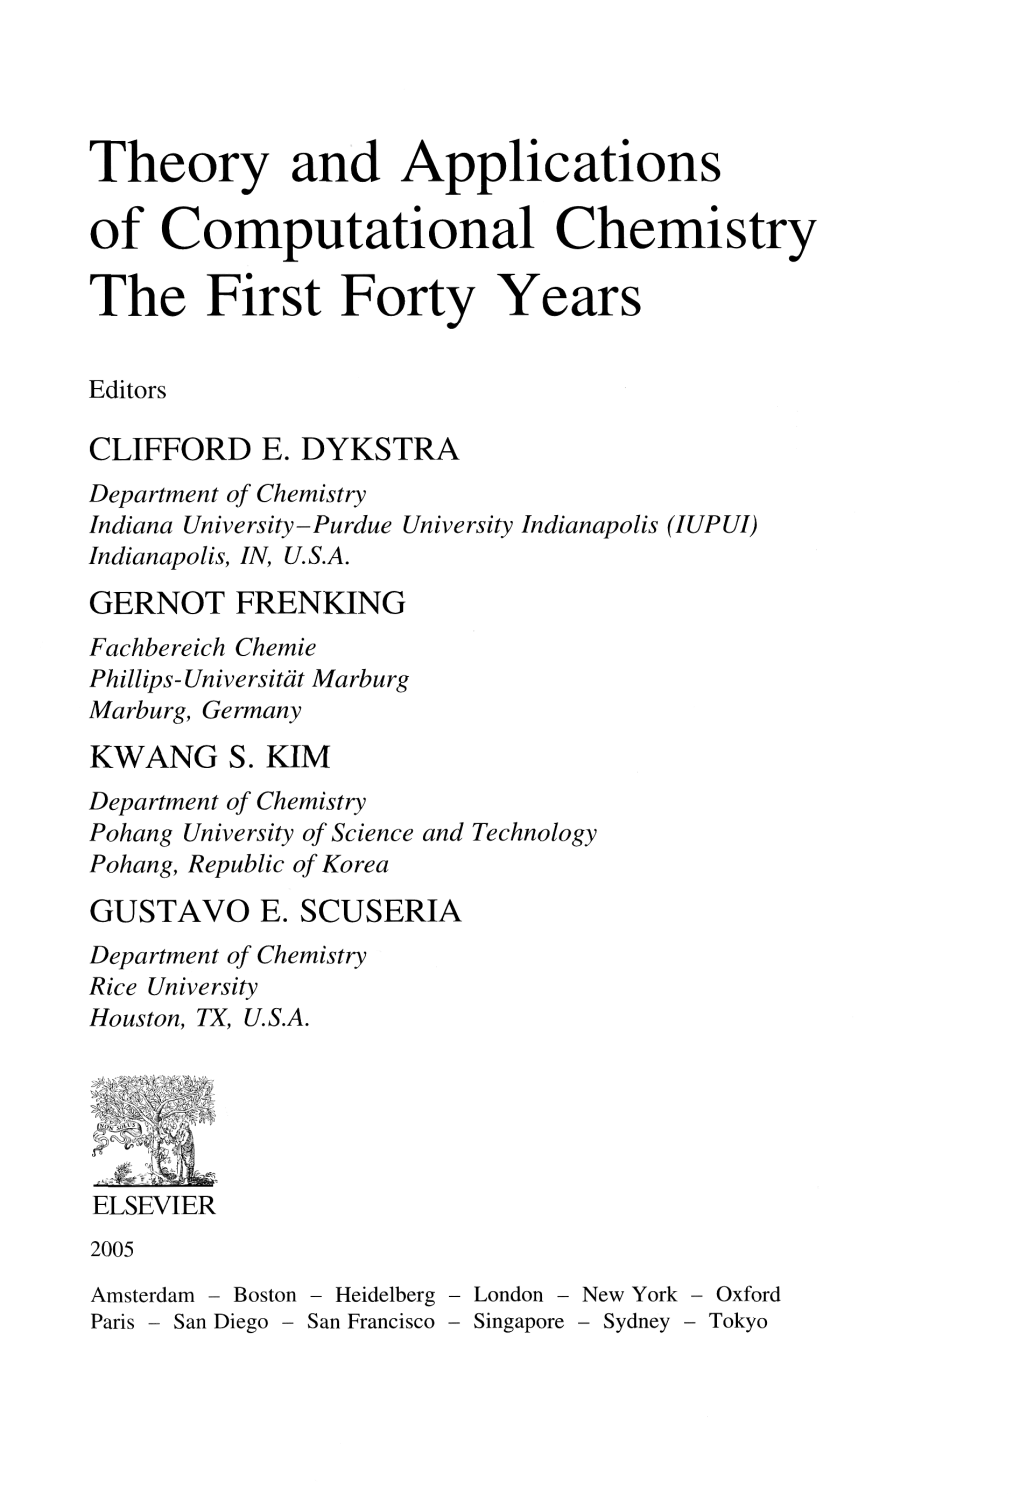 Theory and Applications of Computational Chemistry the First Forty Years